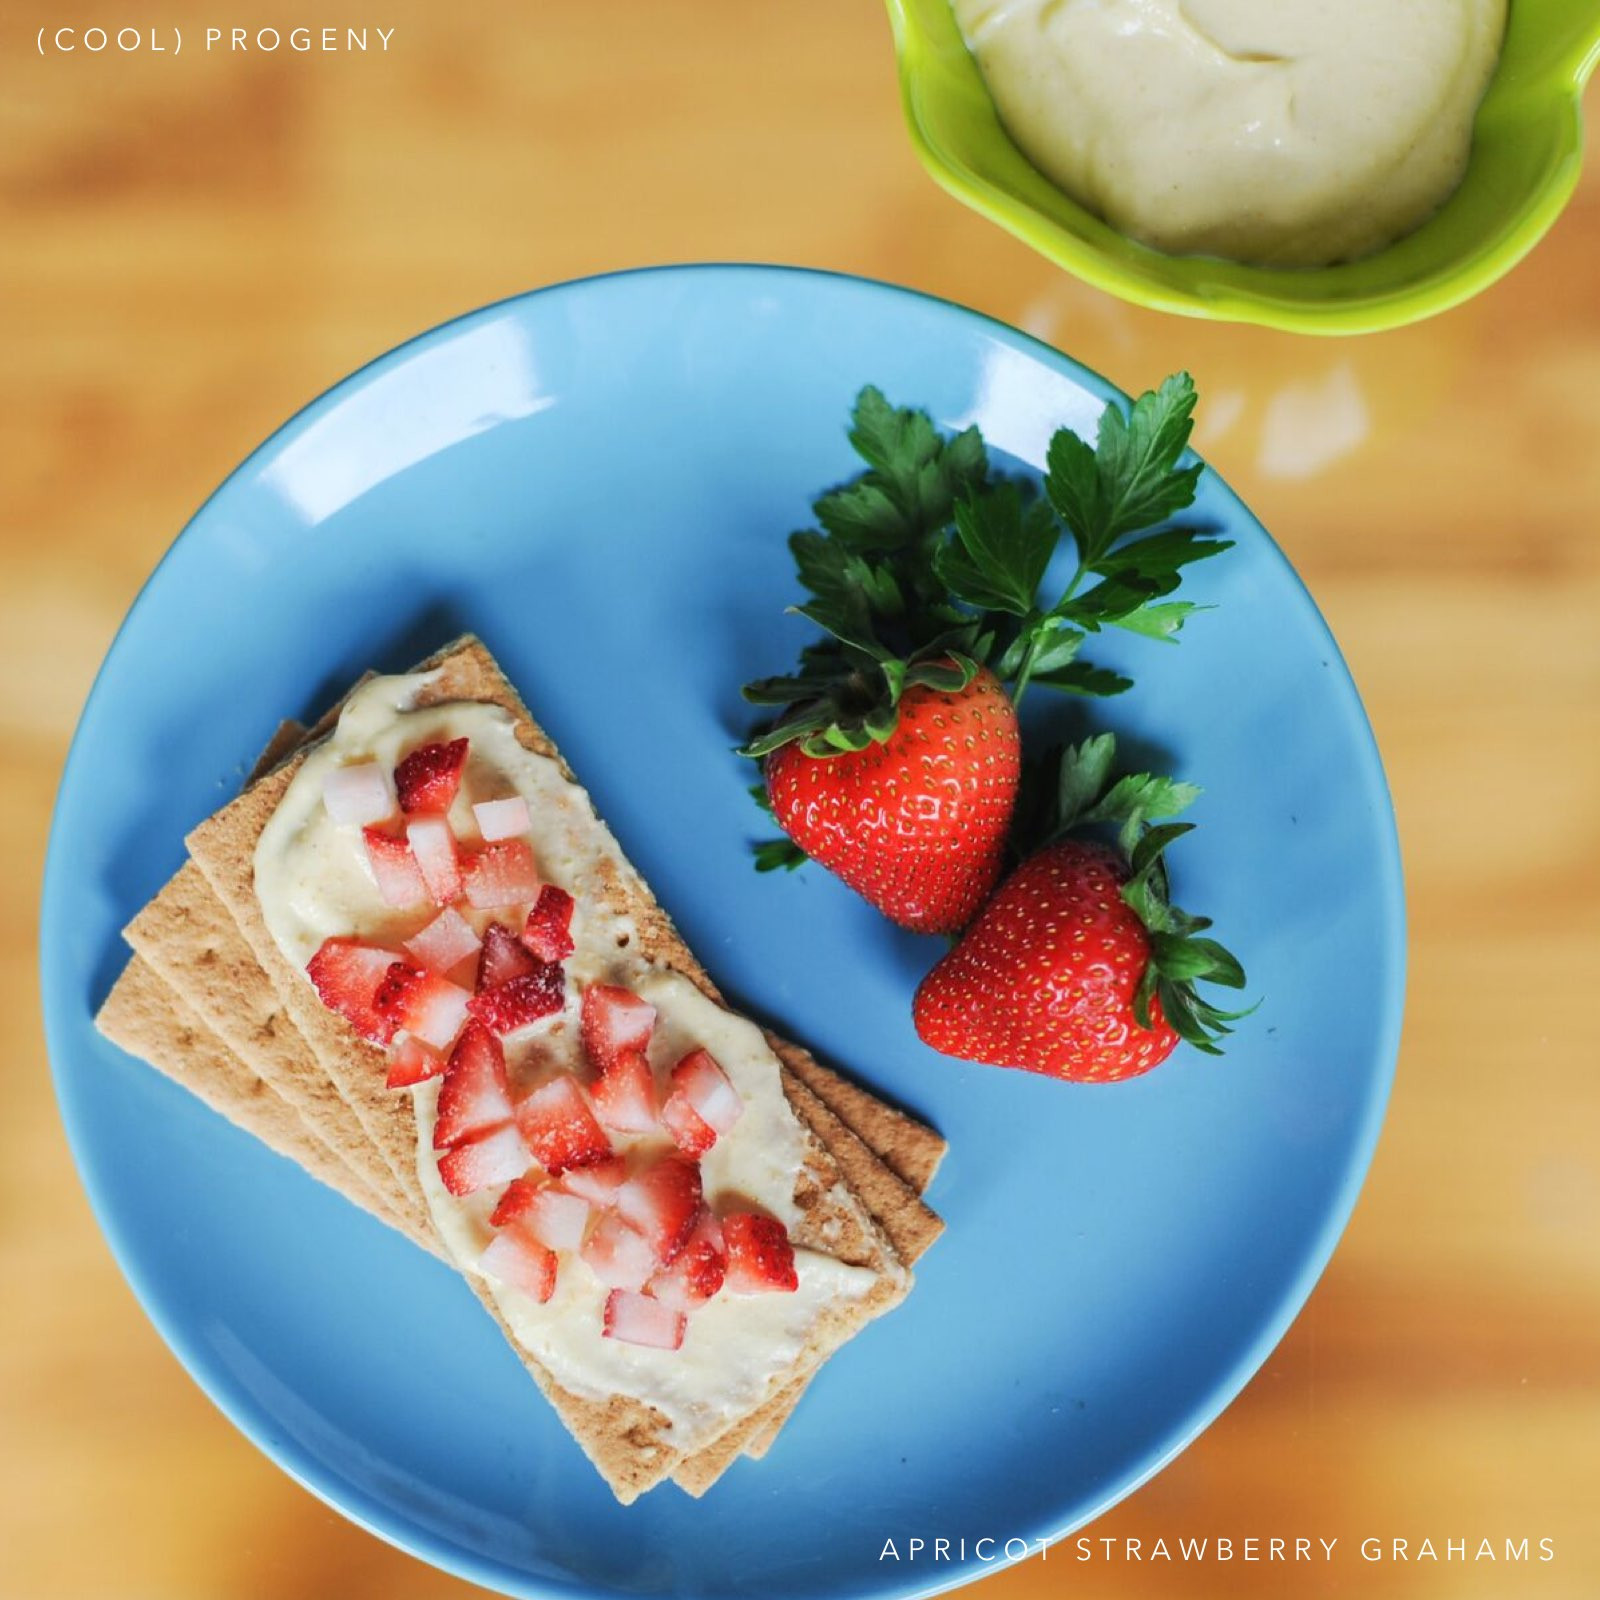 Healthy Snacks for Kids Inspirational Five Healthy Summer Snacks for Kids Cool Progeny